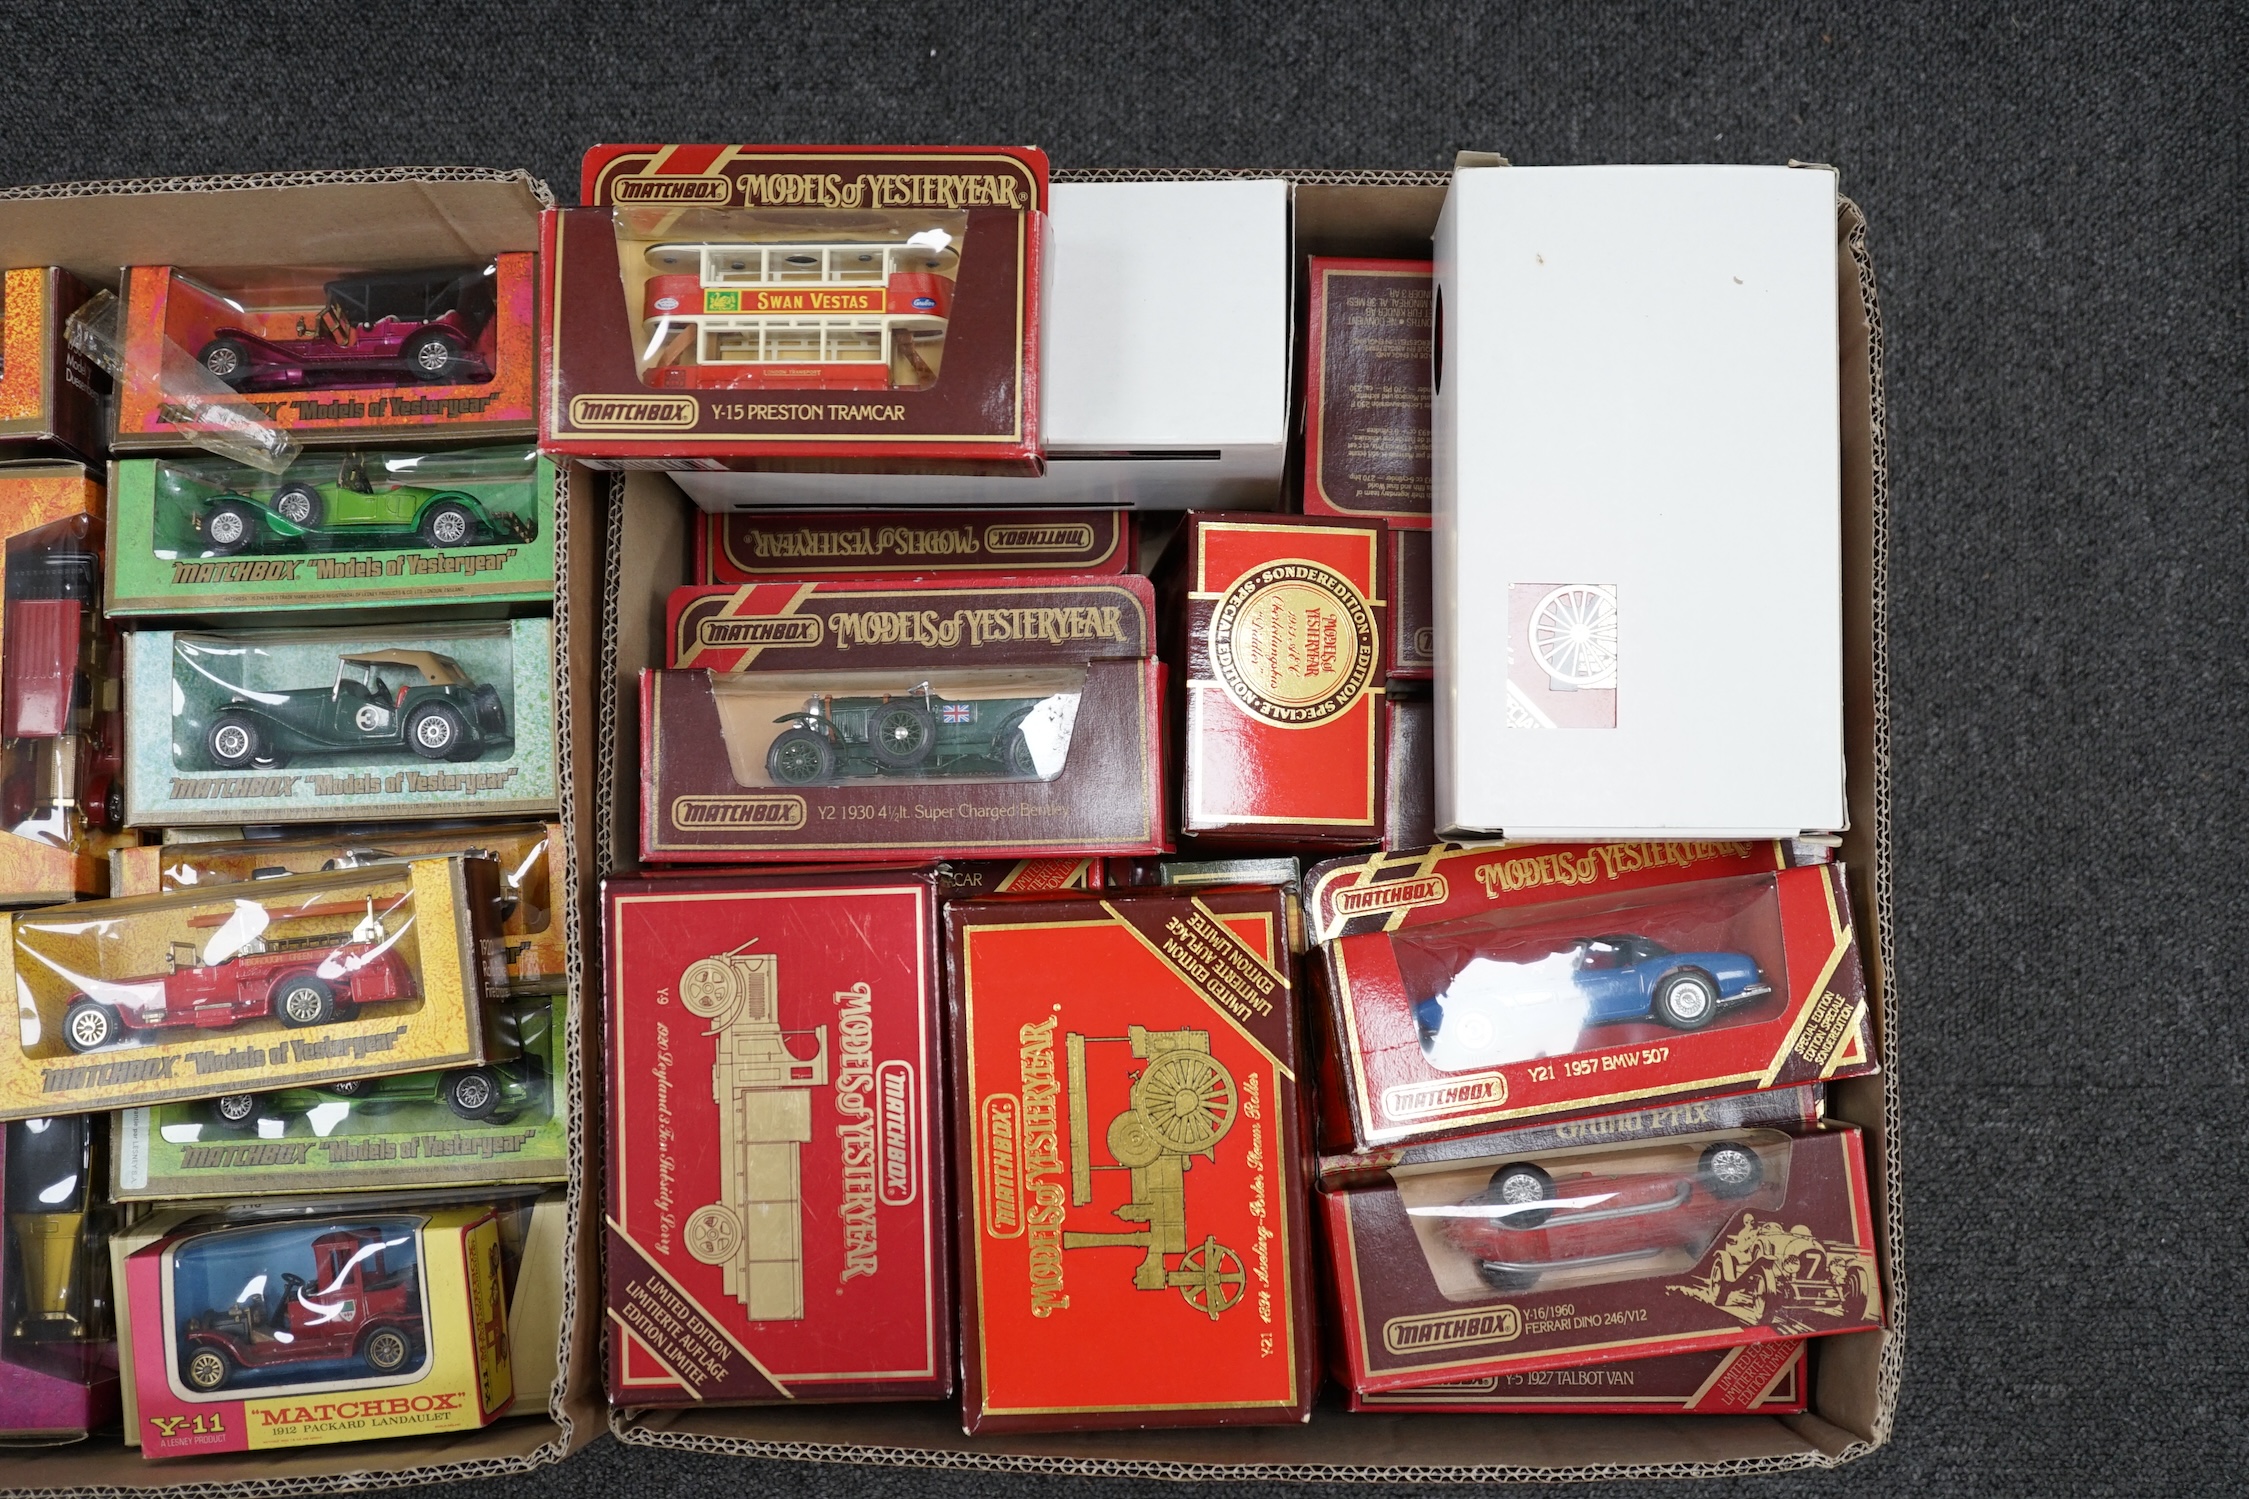 Seventy-nine Matchbox Models of Yesteryear in mainly woodgrain, cream and maroon era boxes, - Image 7 of 8